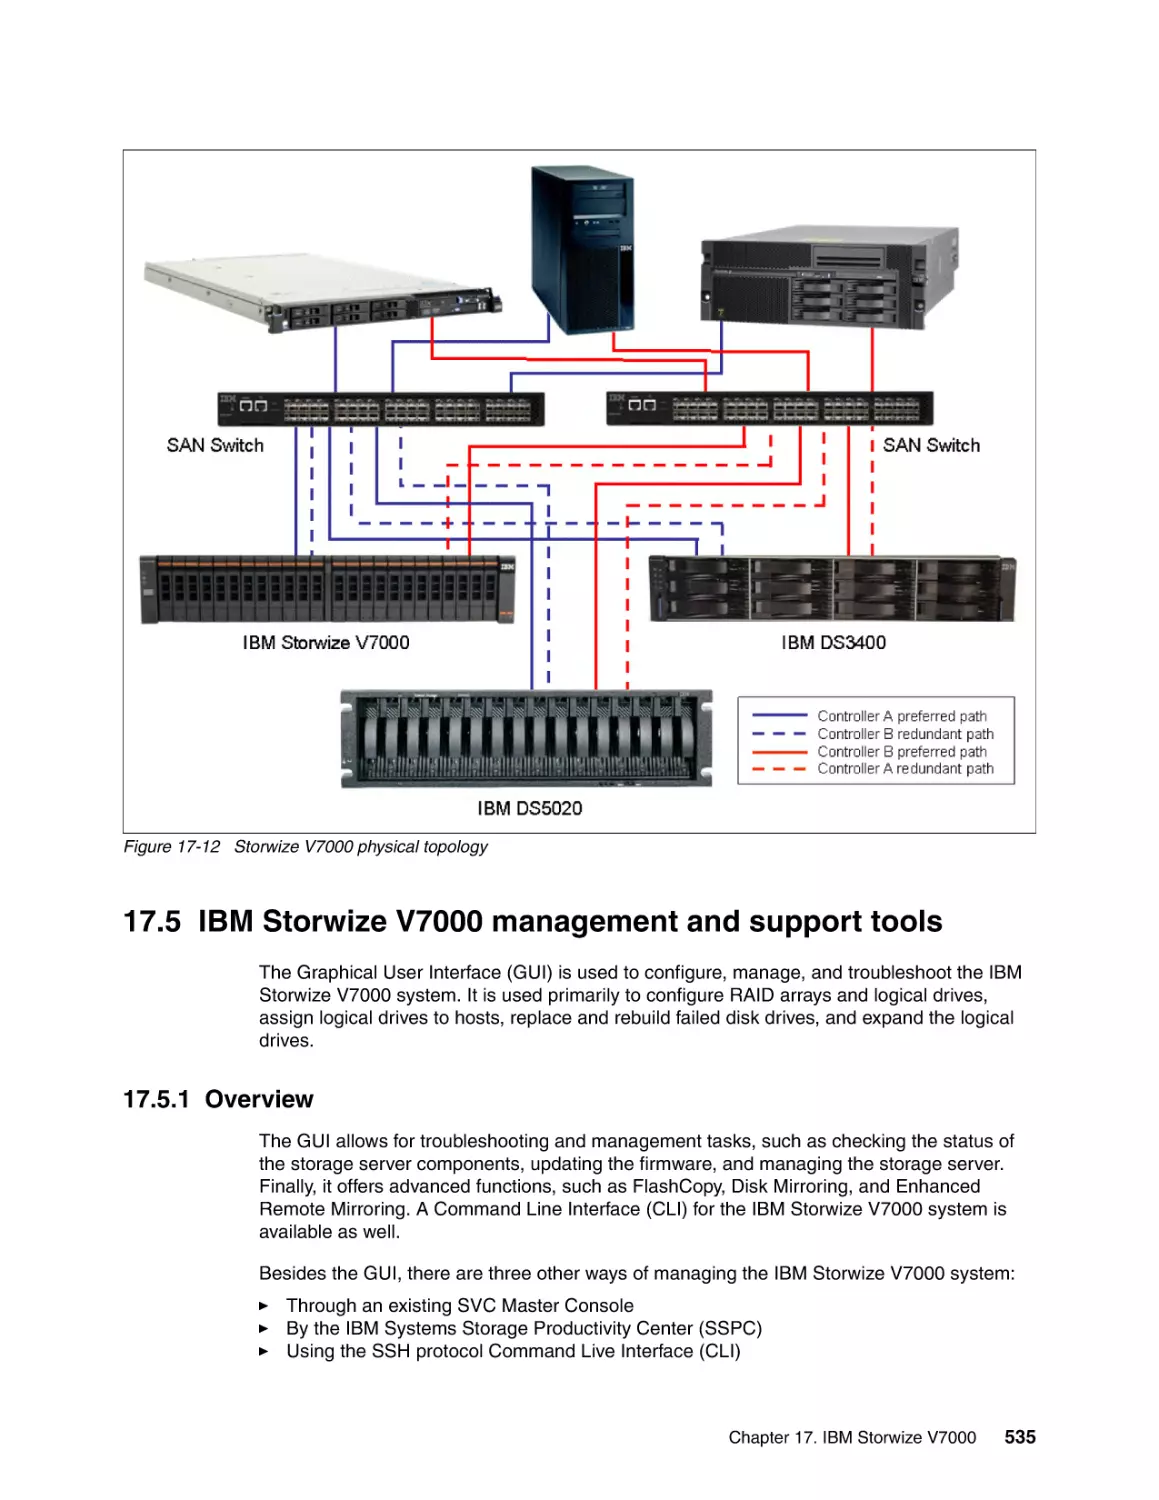 17.5 IBM Storwize V7000 management and support tools
17.5.1 Overview